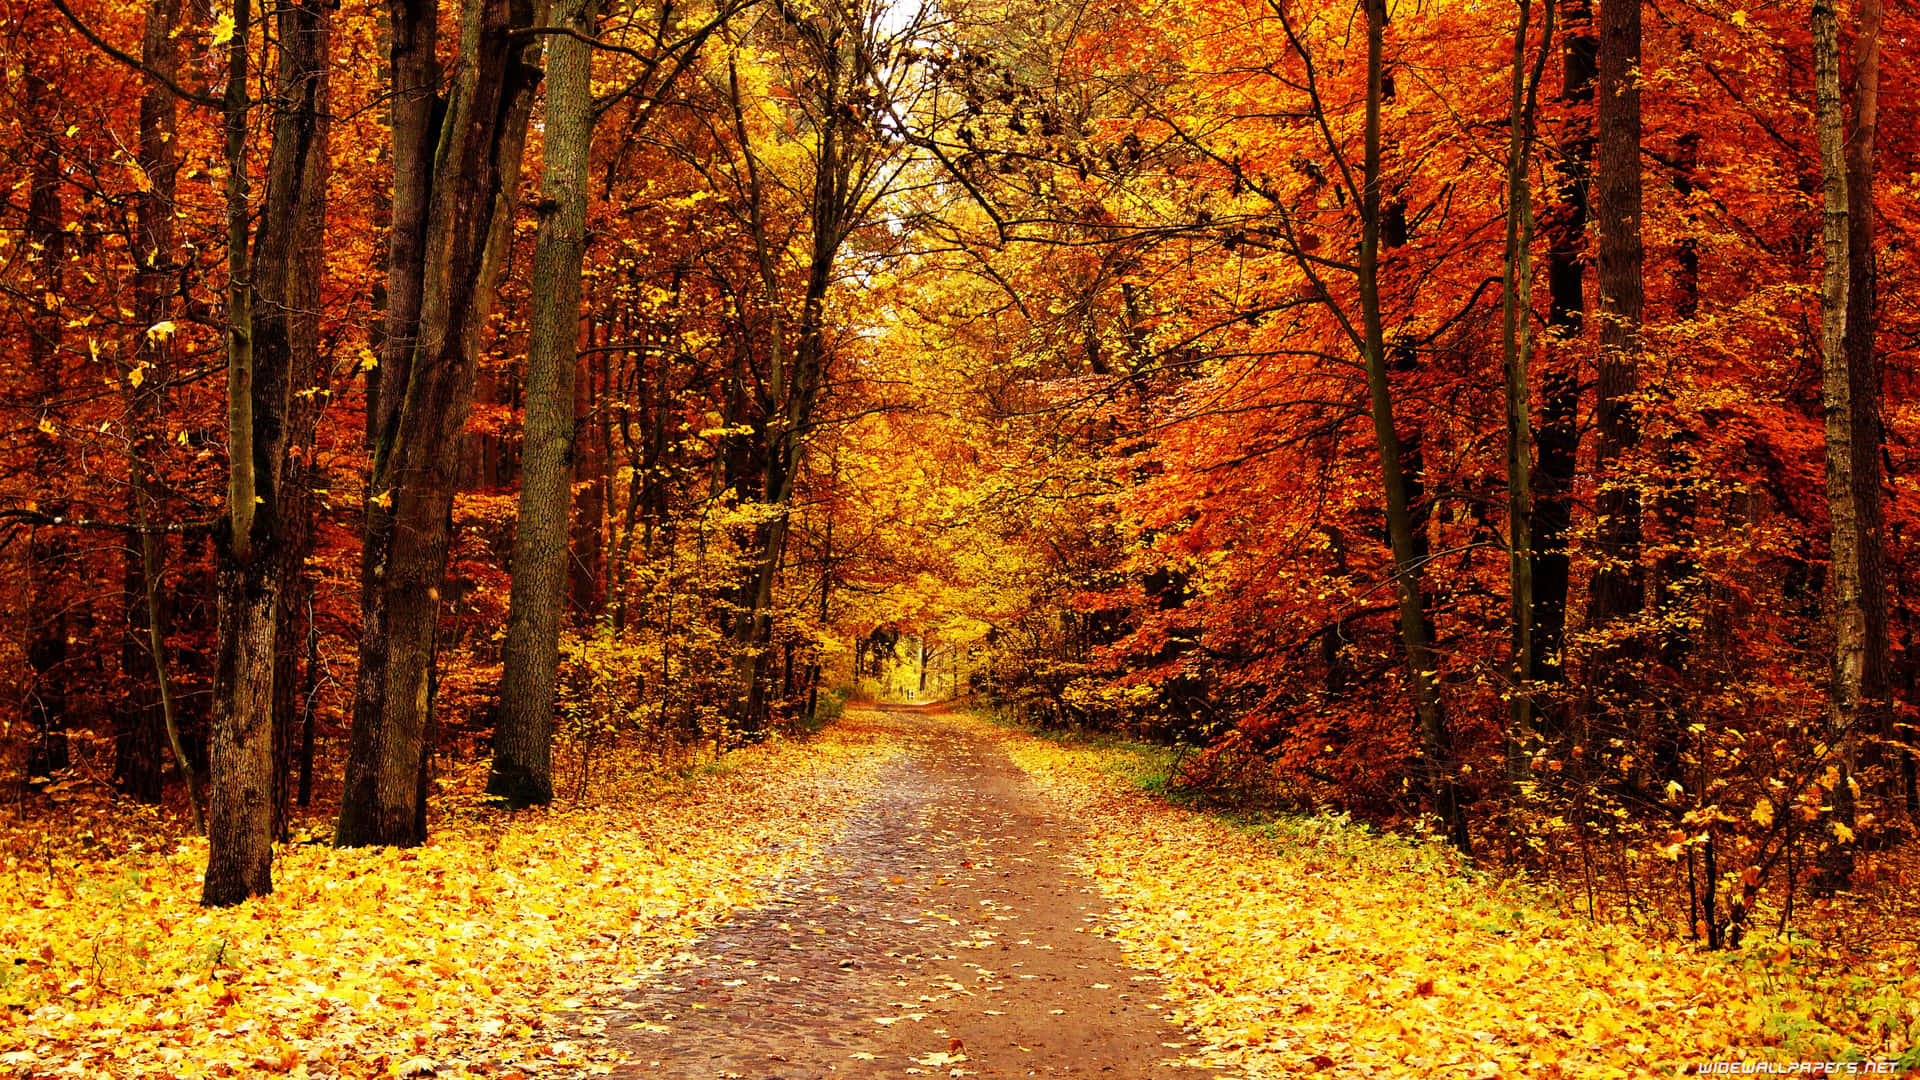 Enjoy the breathtaking beauty of autumn's vibrant colors spread out before you. Wallpaper